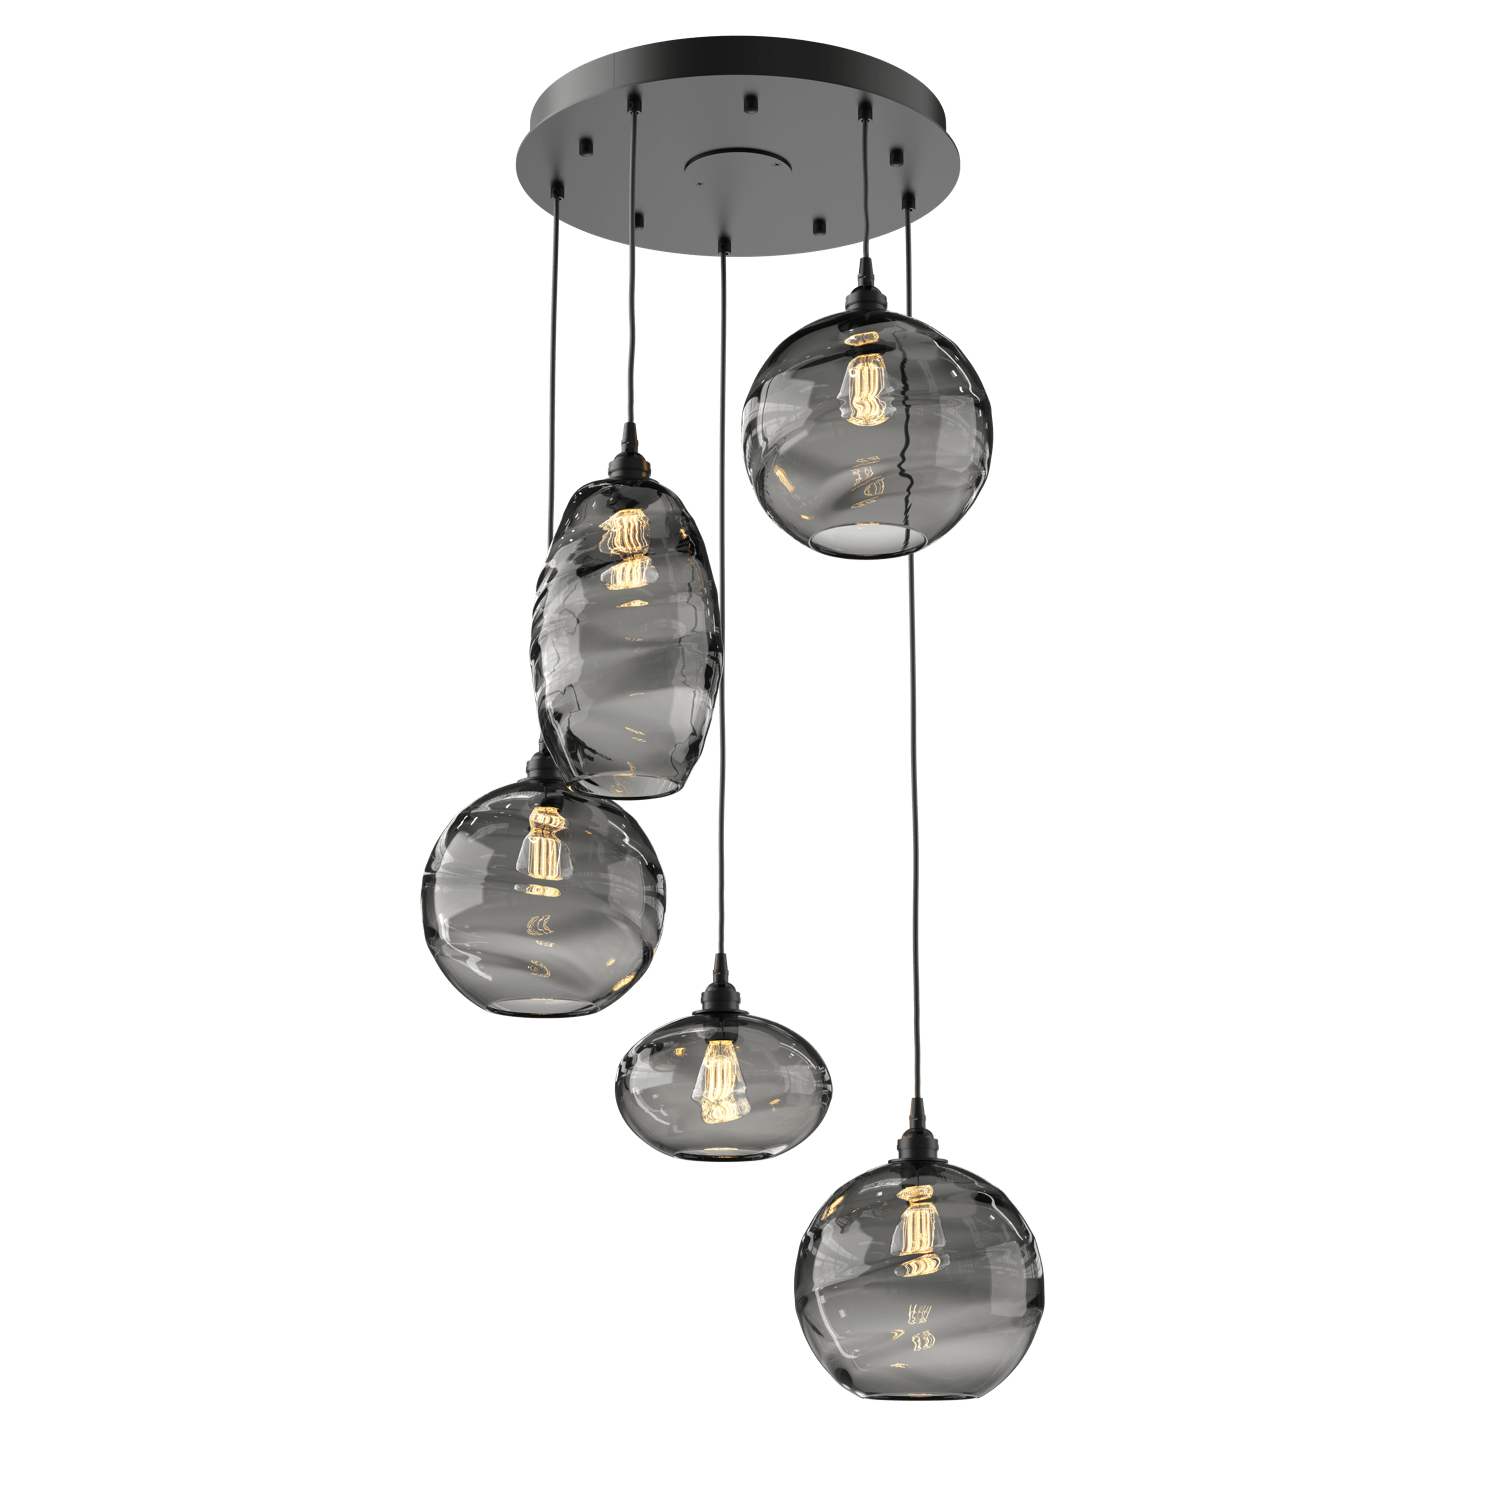 CHB0048-05-MB-OS-Hammerton-Studio-Optic-Blown-Glass-Misto-5-light-round-pendant-chandelier-with-matte-black-finish-and-optic-smoke-blown-glass-shades-and-incandescent-lamping